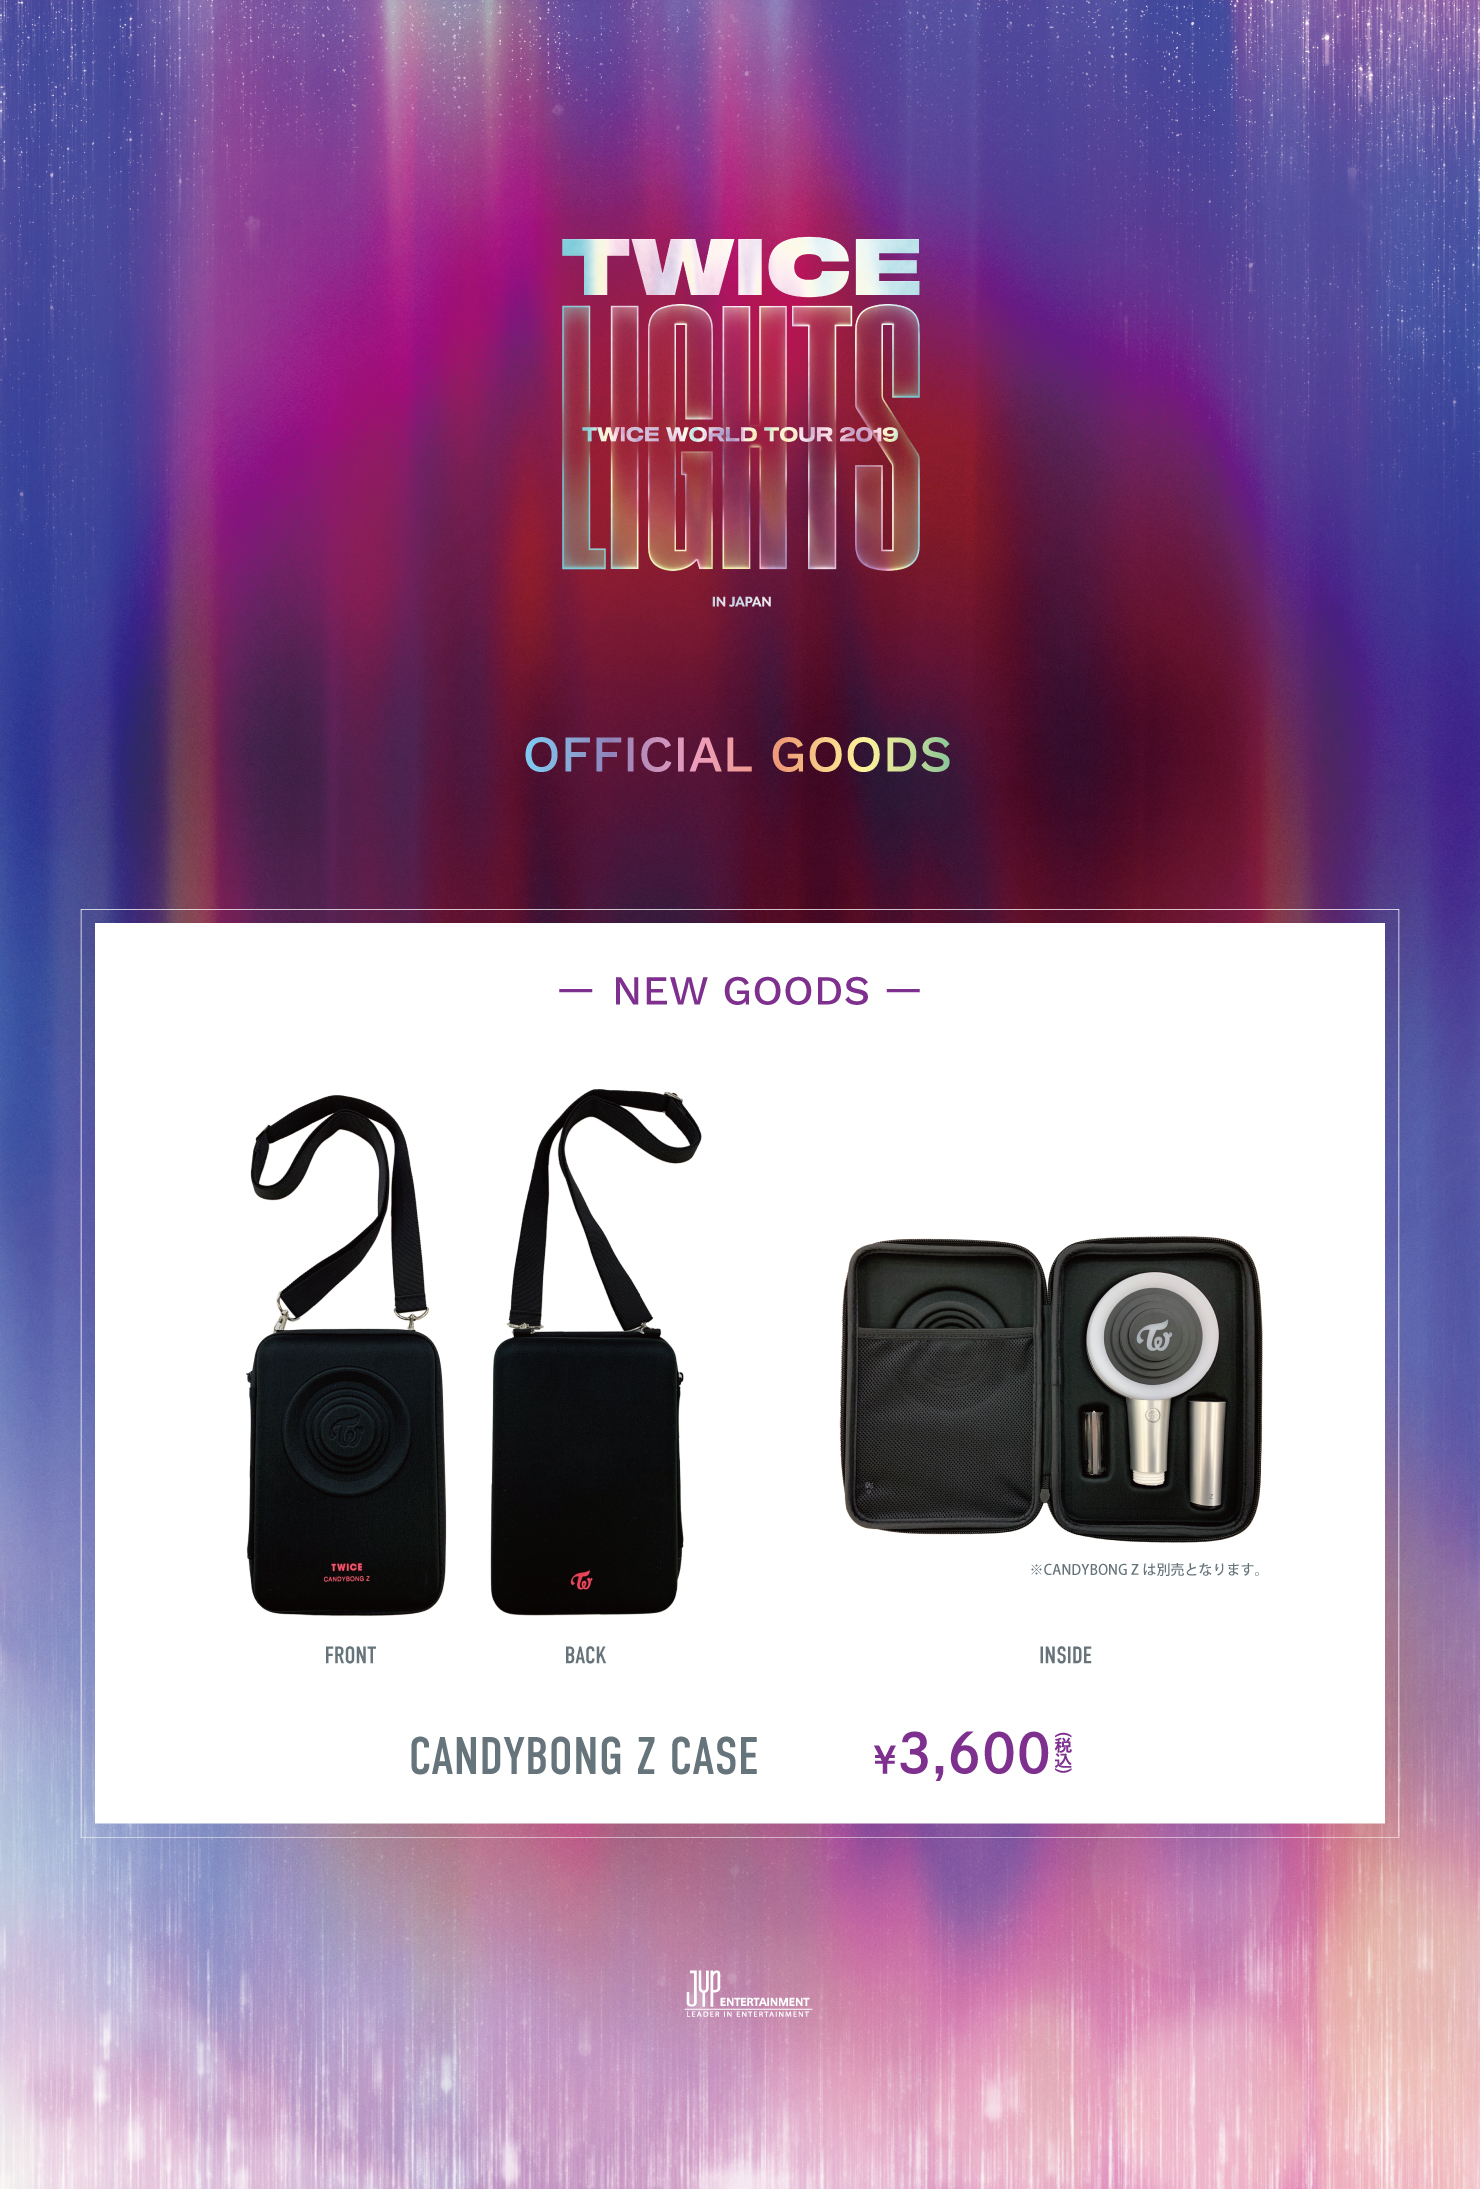 TWICE WORLD TOUR 2019 'TWICELIGHTS' IN JAPAN CANDYBONG Z CASEが11 